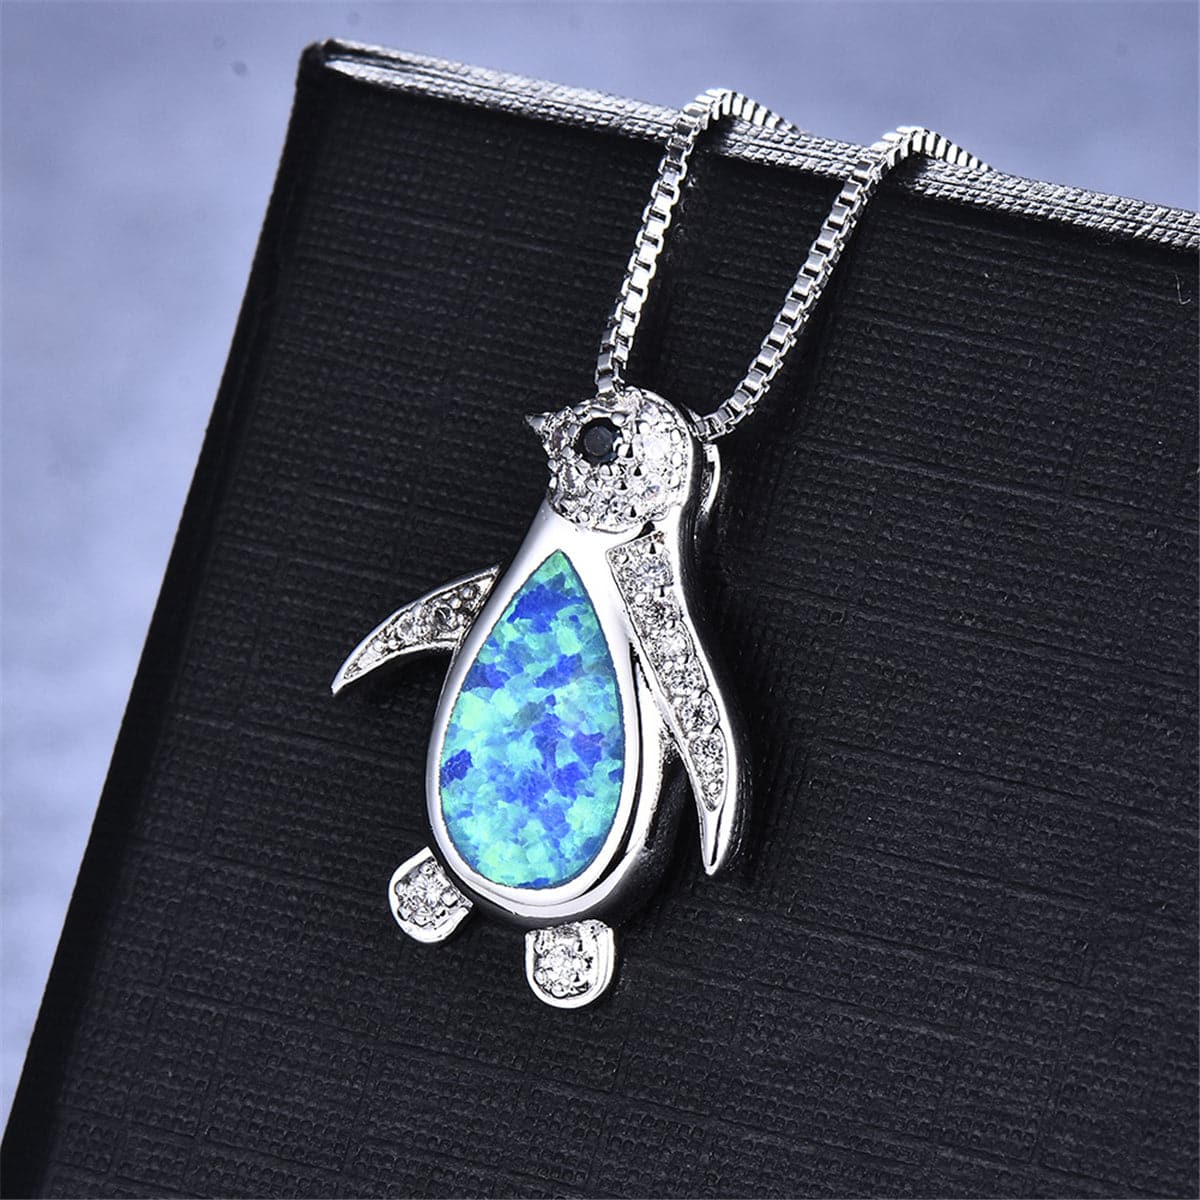 Little horse charm/pendant,blue opal clear CZ micro paved,findingings,Cubic Zirconia CZ pendant,jewelry supplies,craft supplies,11mm,1pc